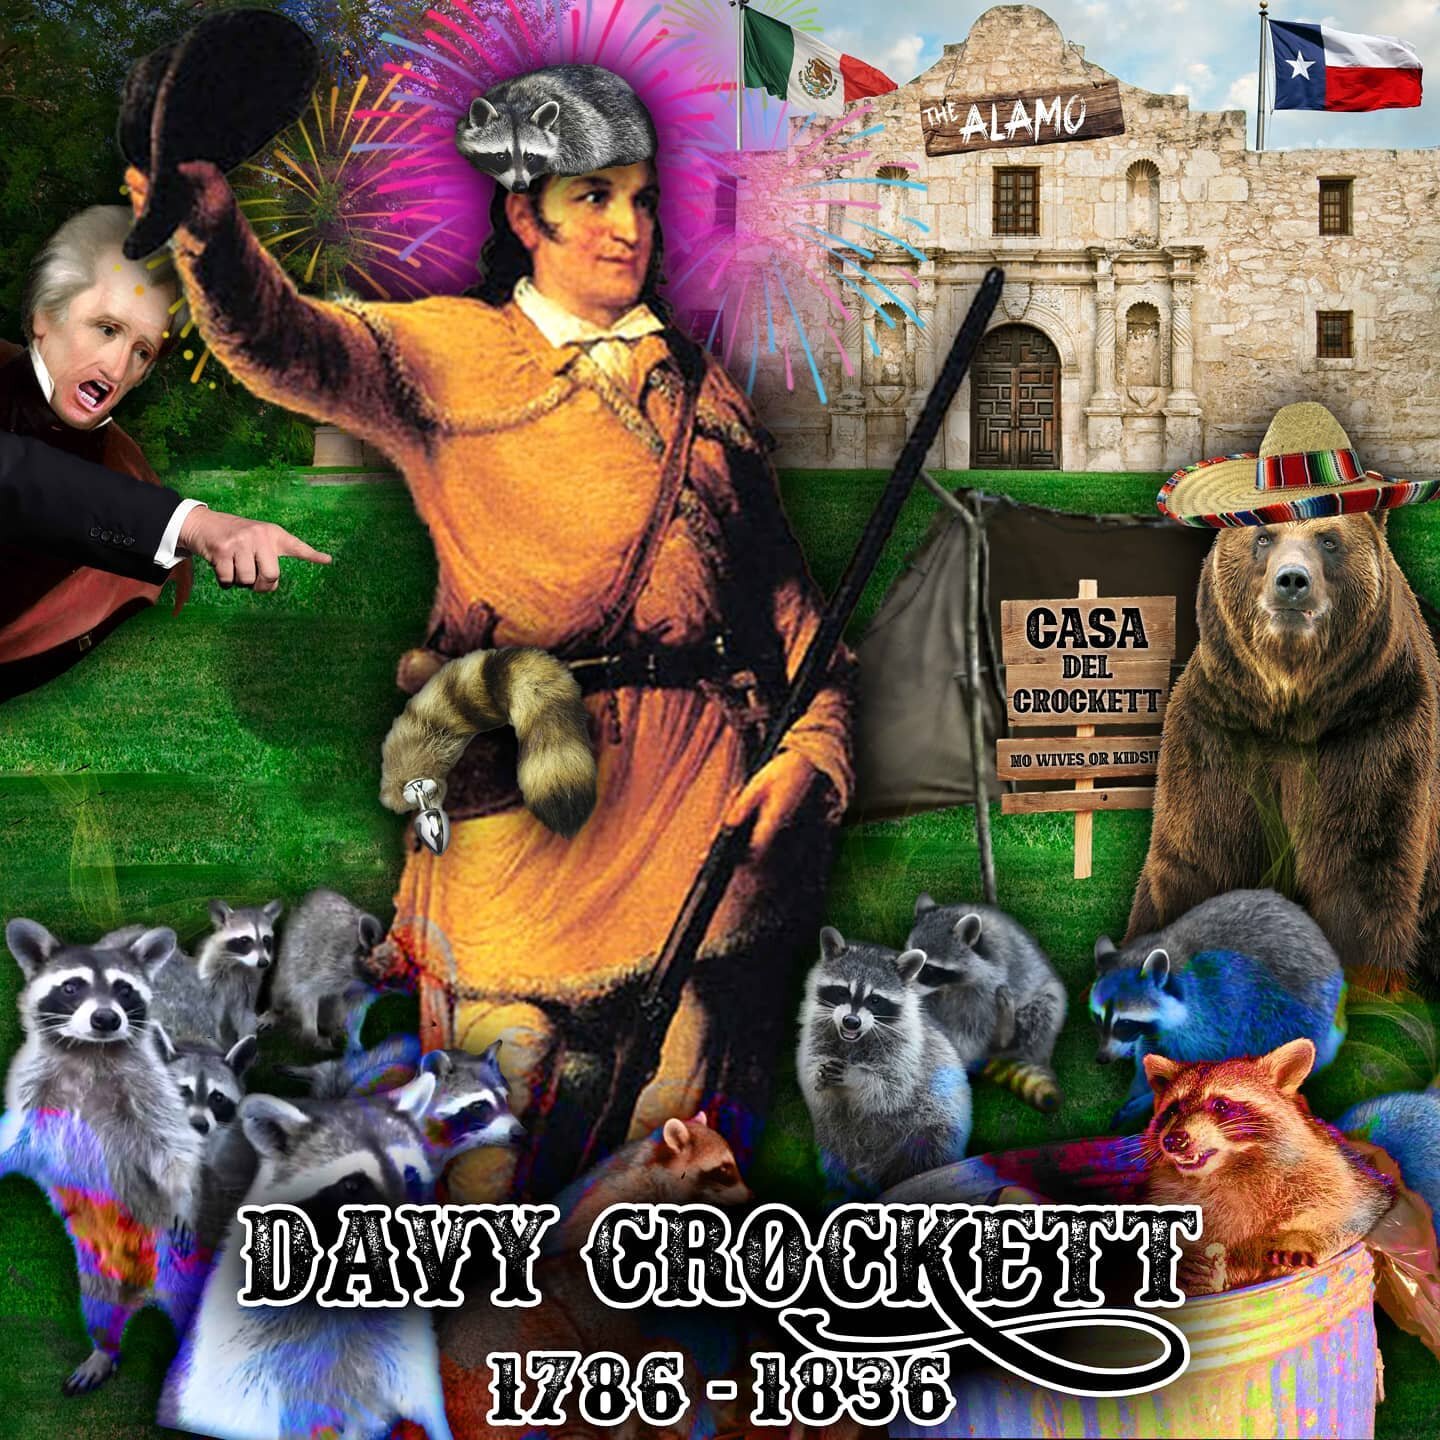 REMEMBER THE ALAMO!!! This grizzled frontiersman embodied the American Spirit of Freedom... Which is freedom for a select few... primarily white anglo-protestants... definitely not woman, native Americans or black people... So I guess he wasn't into 